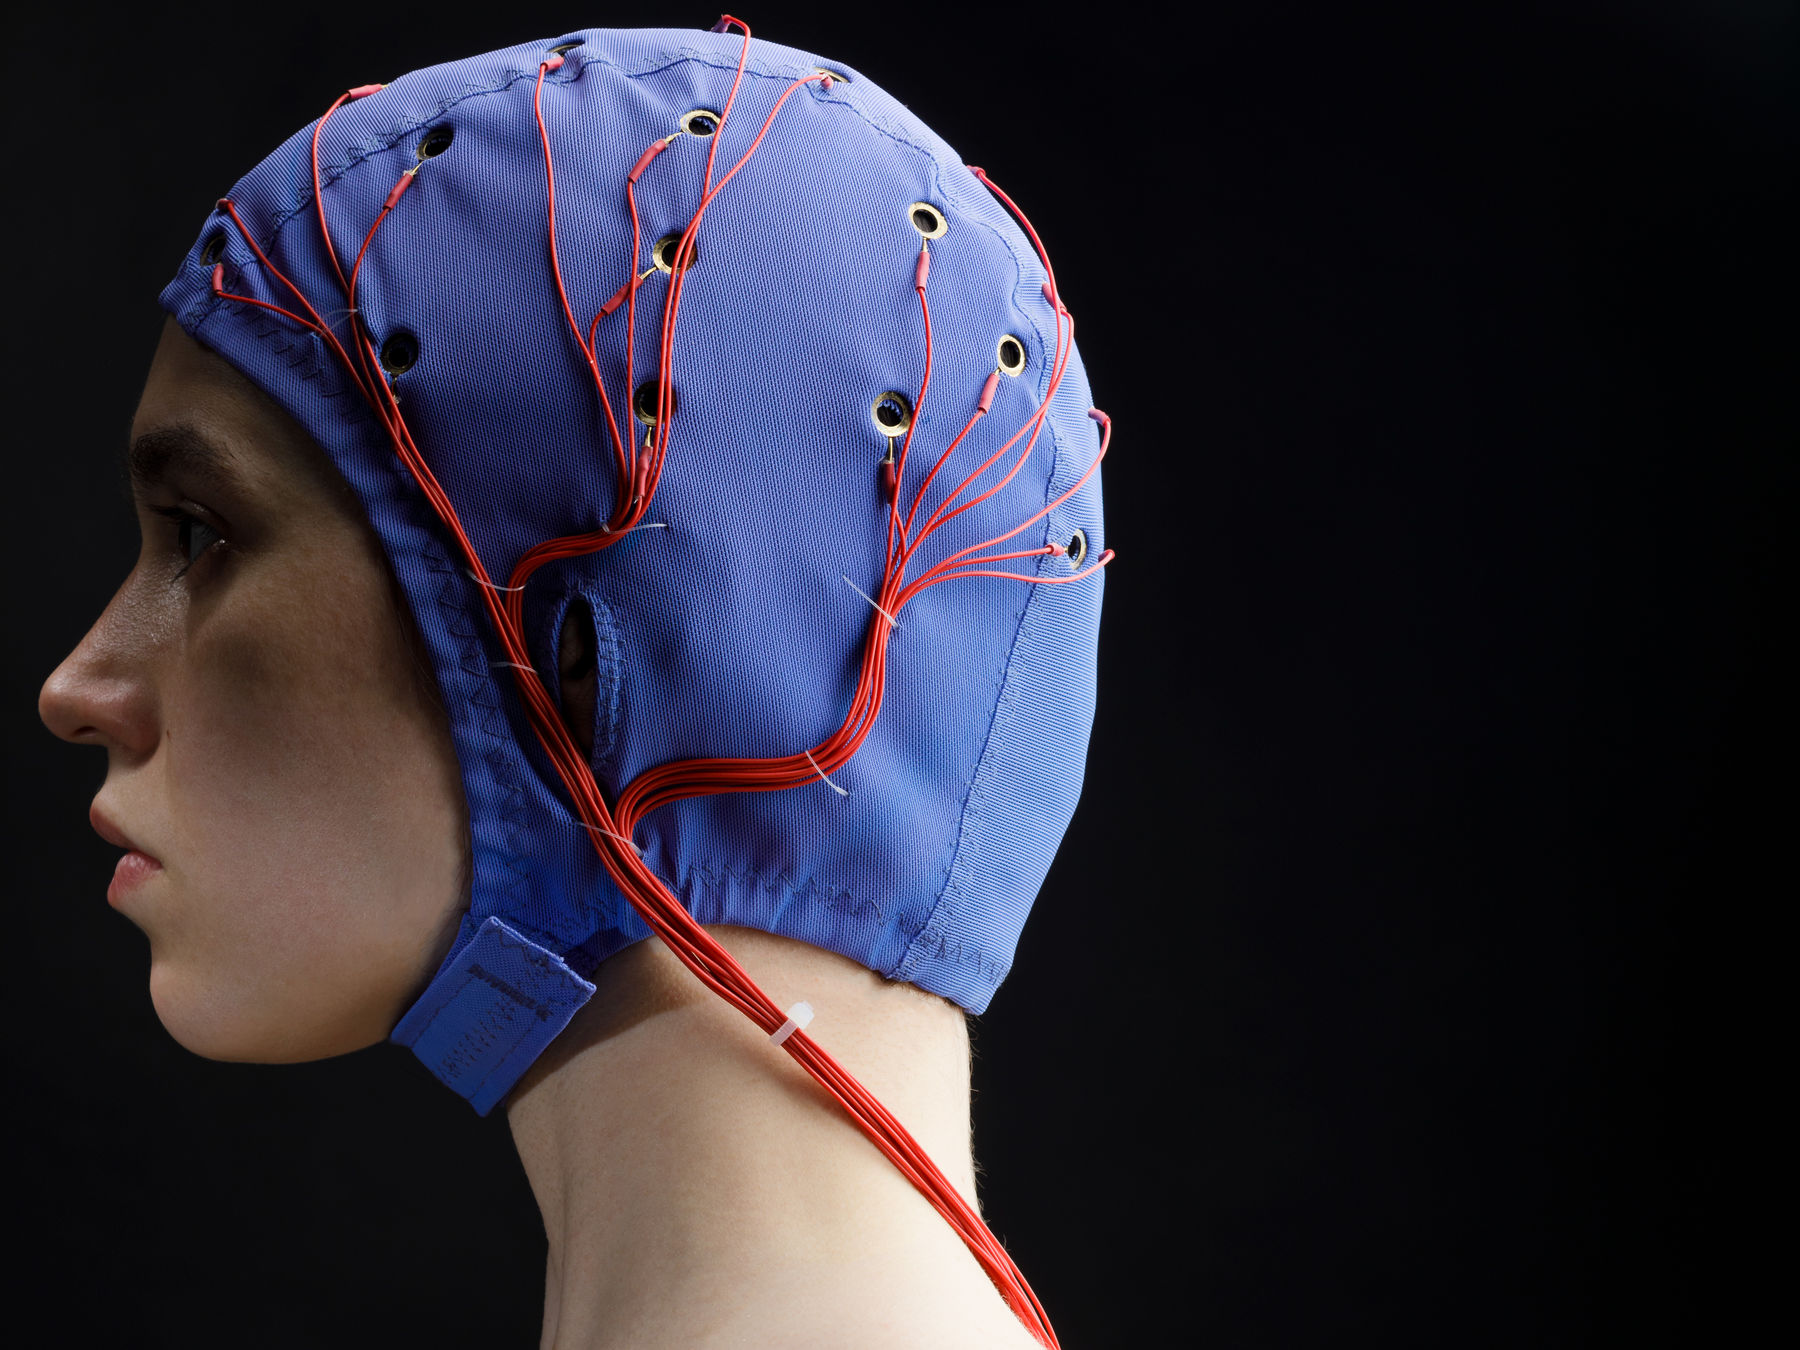 A woman in profile view facing left wears a cobalt blue EEG cap with red wires coming from circular metal eyelets on the surface. She is slightly left of centre. Her hair is not visible under the cap. The flash coming from the right illuminates the back of her head and leave her face in shadow. The red wires fall from outside her ear to behind her shoulder.